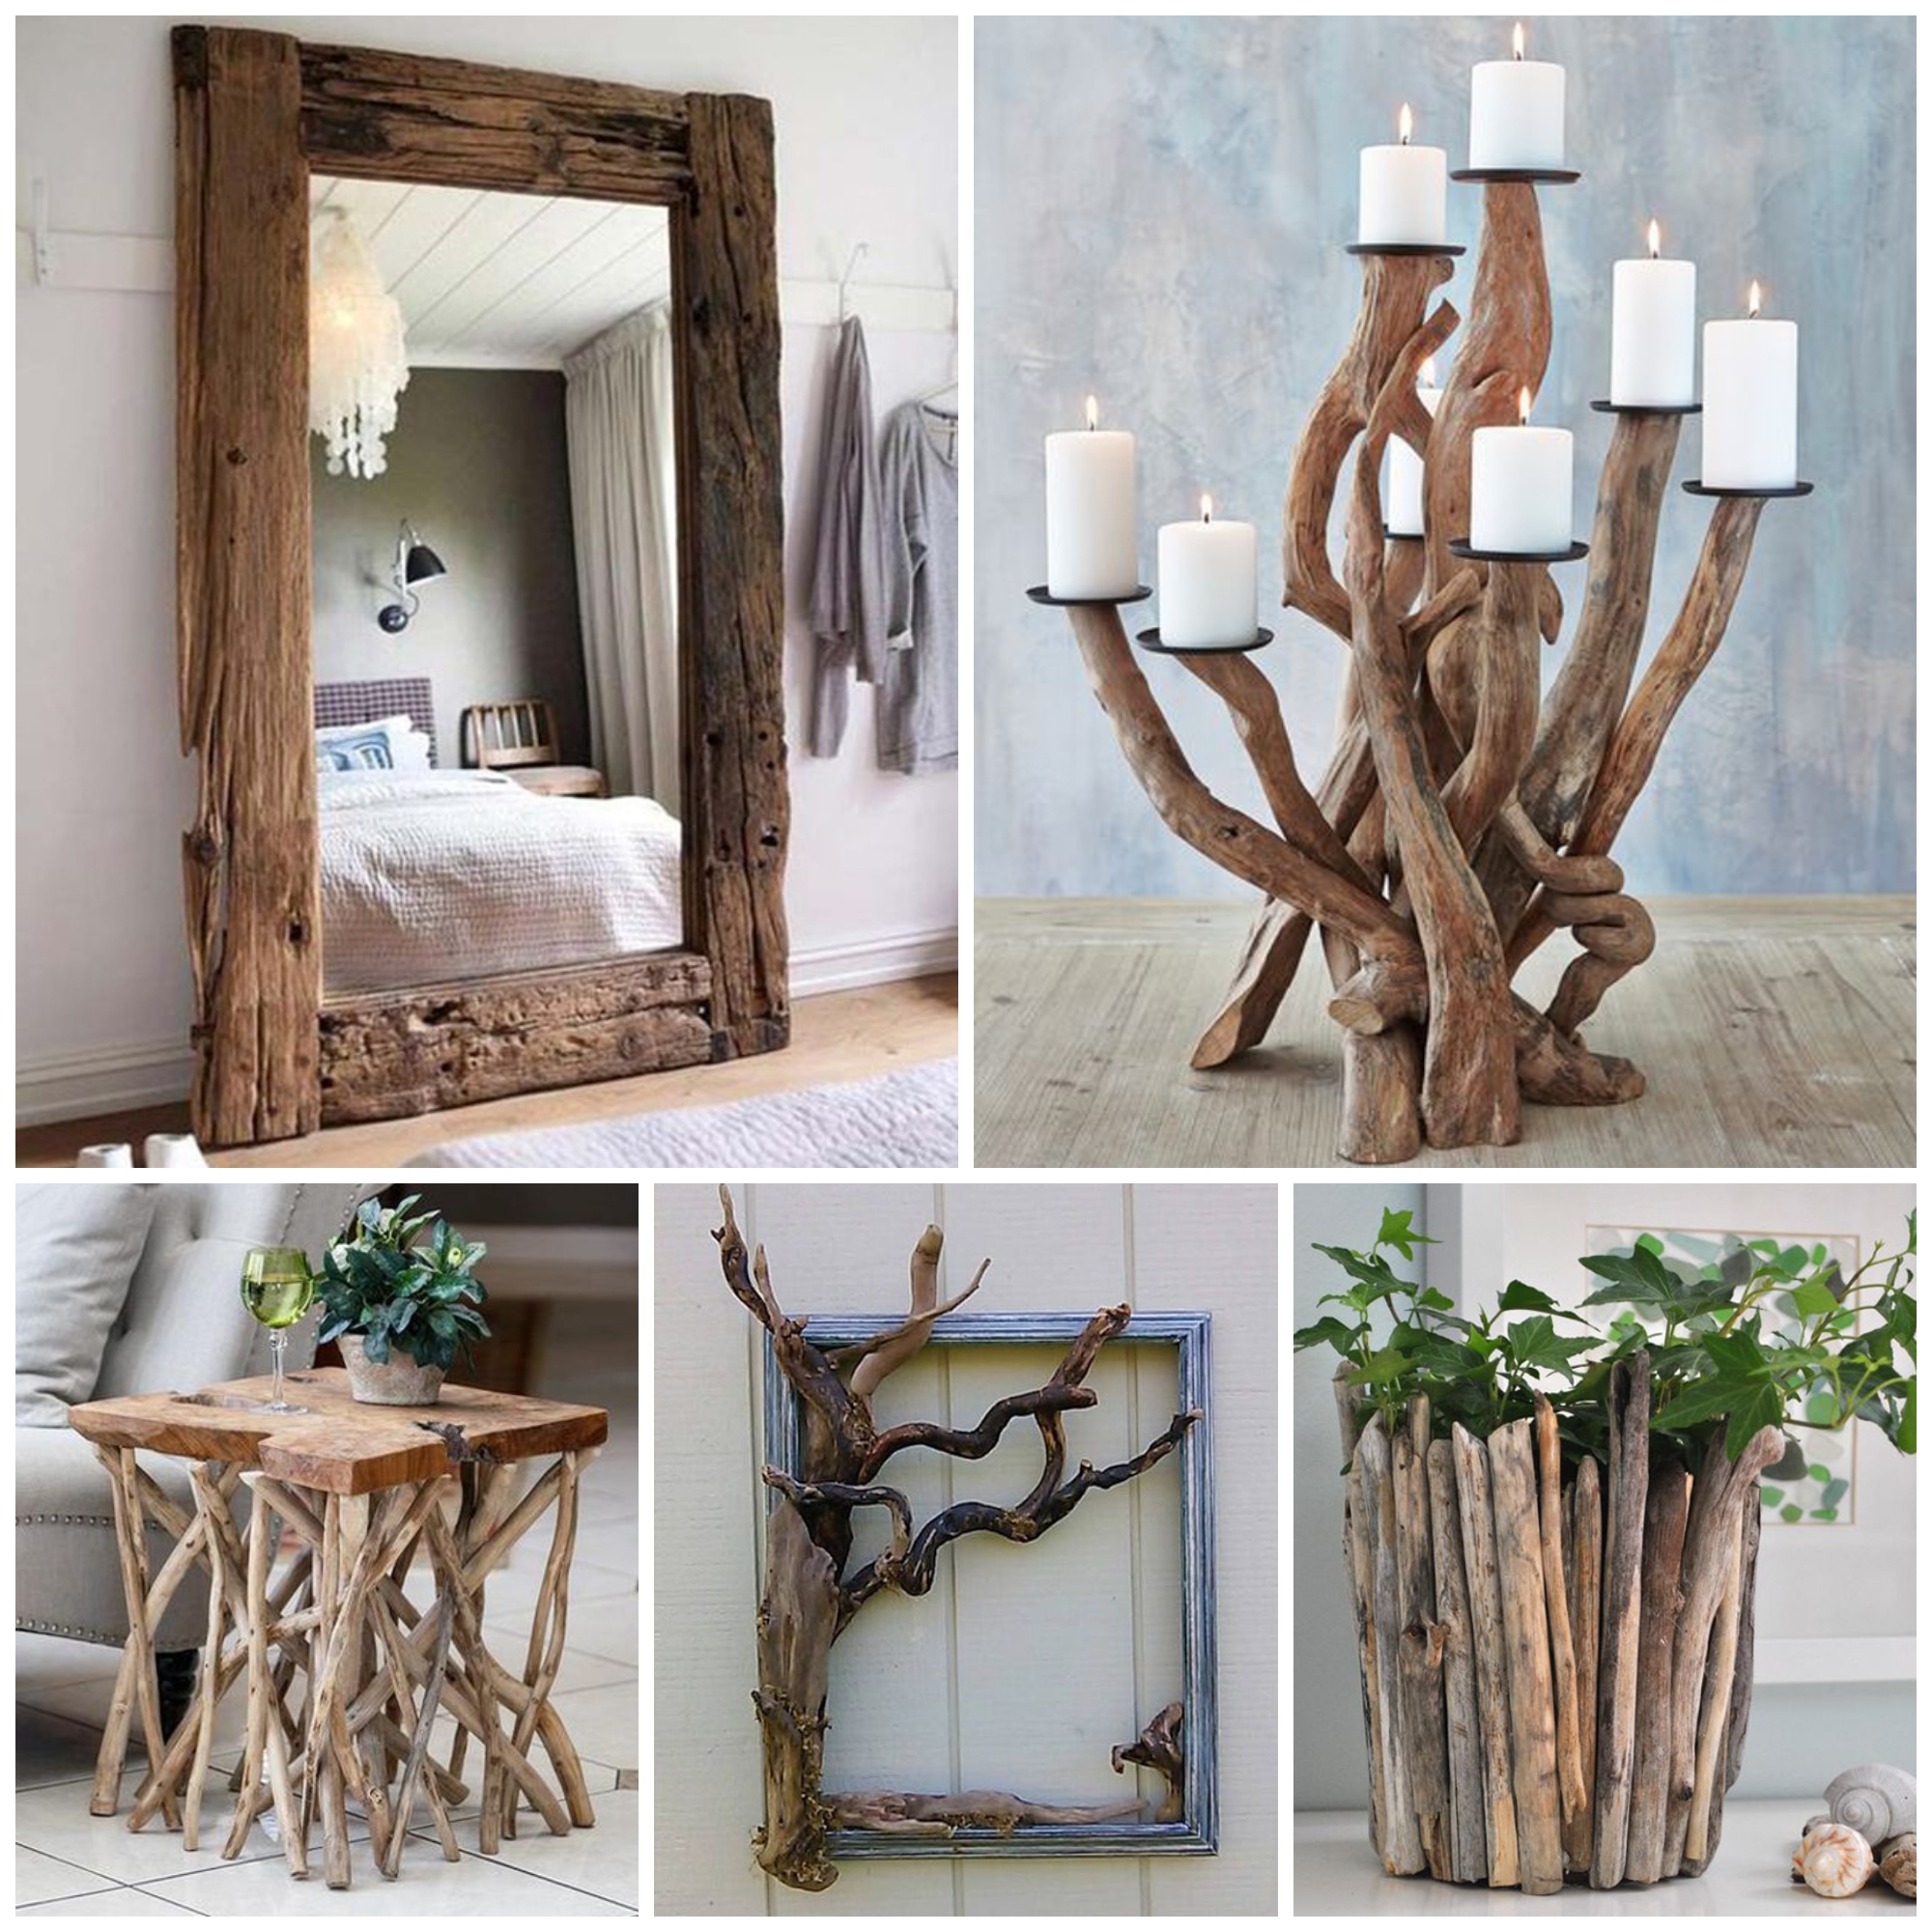 Artistic Driftwood Art Ideas To Decorate Your Home